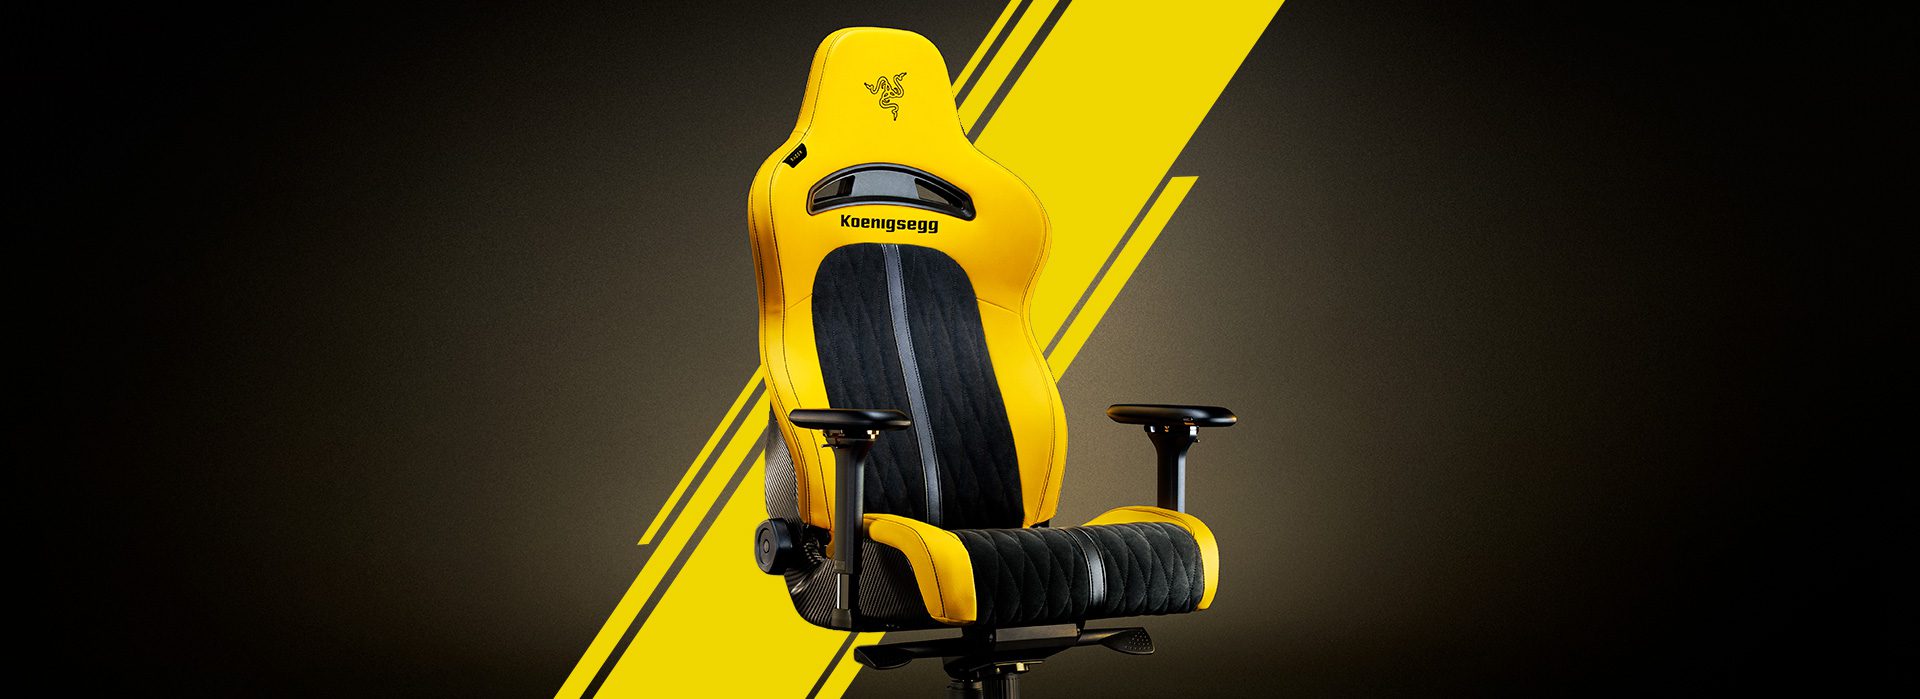 The Razer Enki Koenigsegg special edition gaming chair in yellow and black